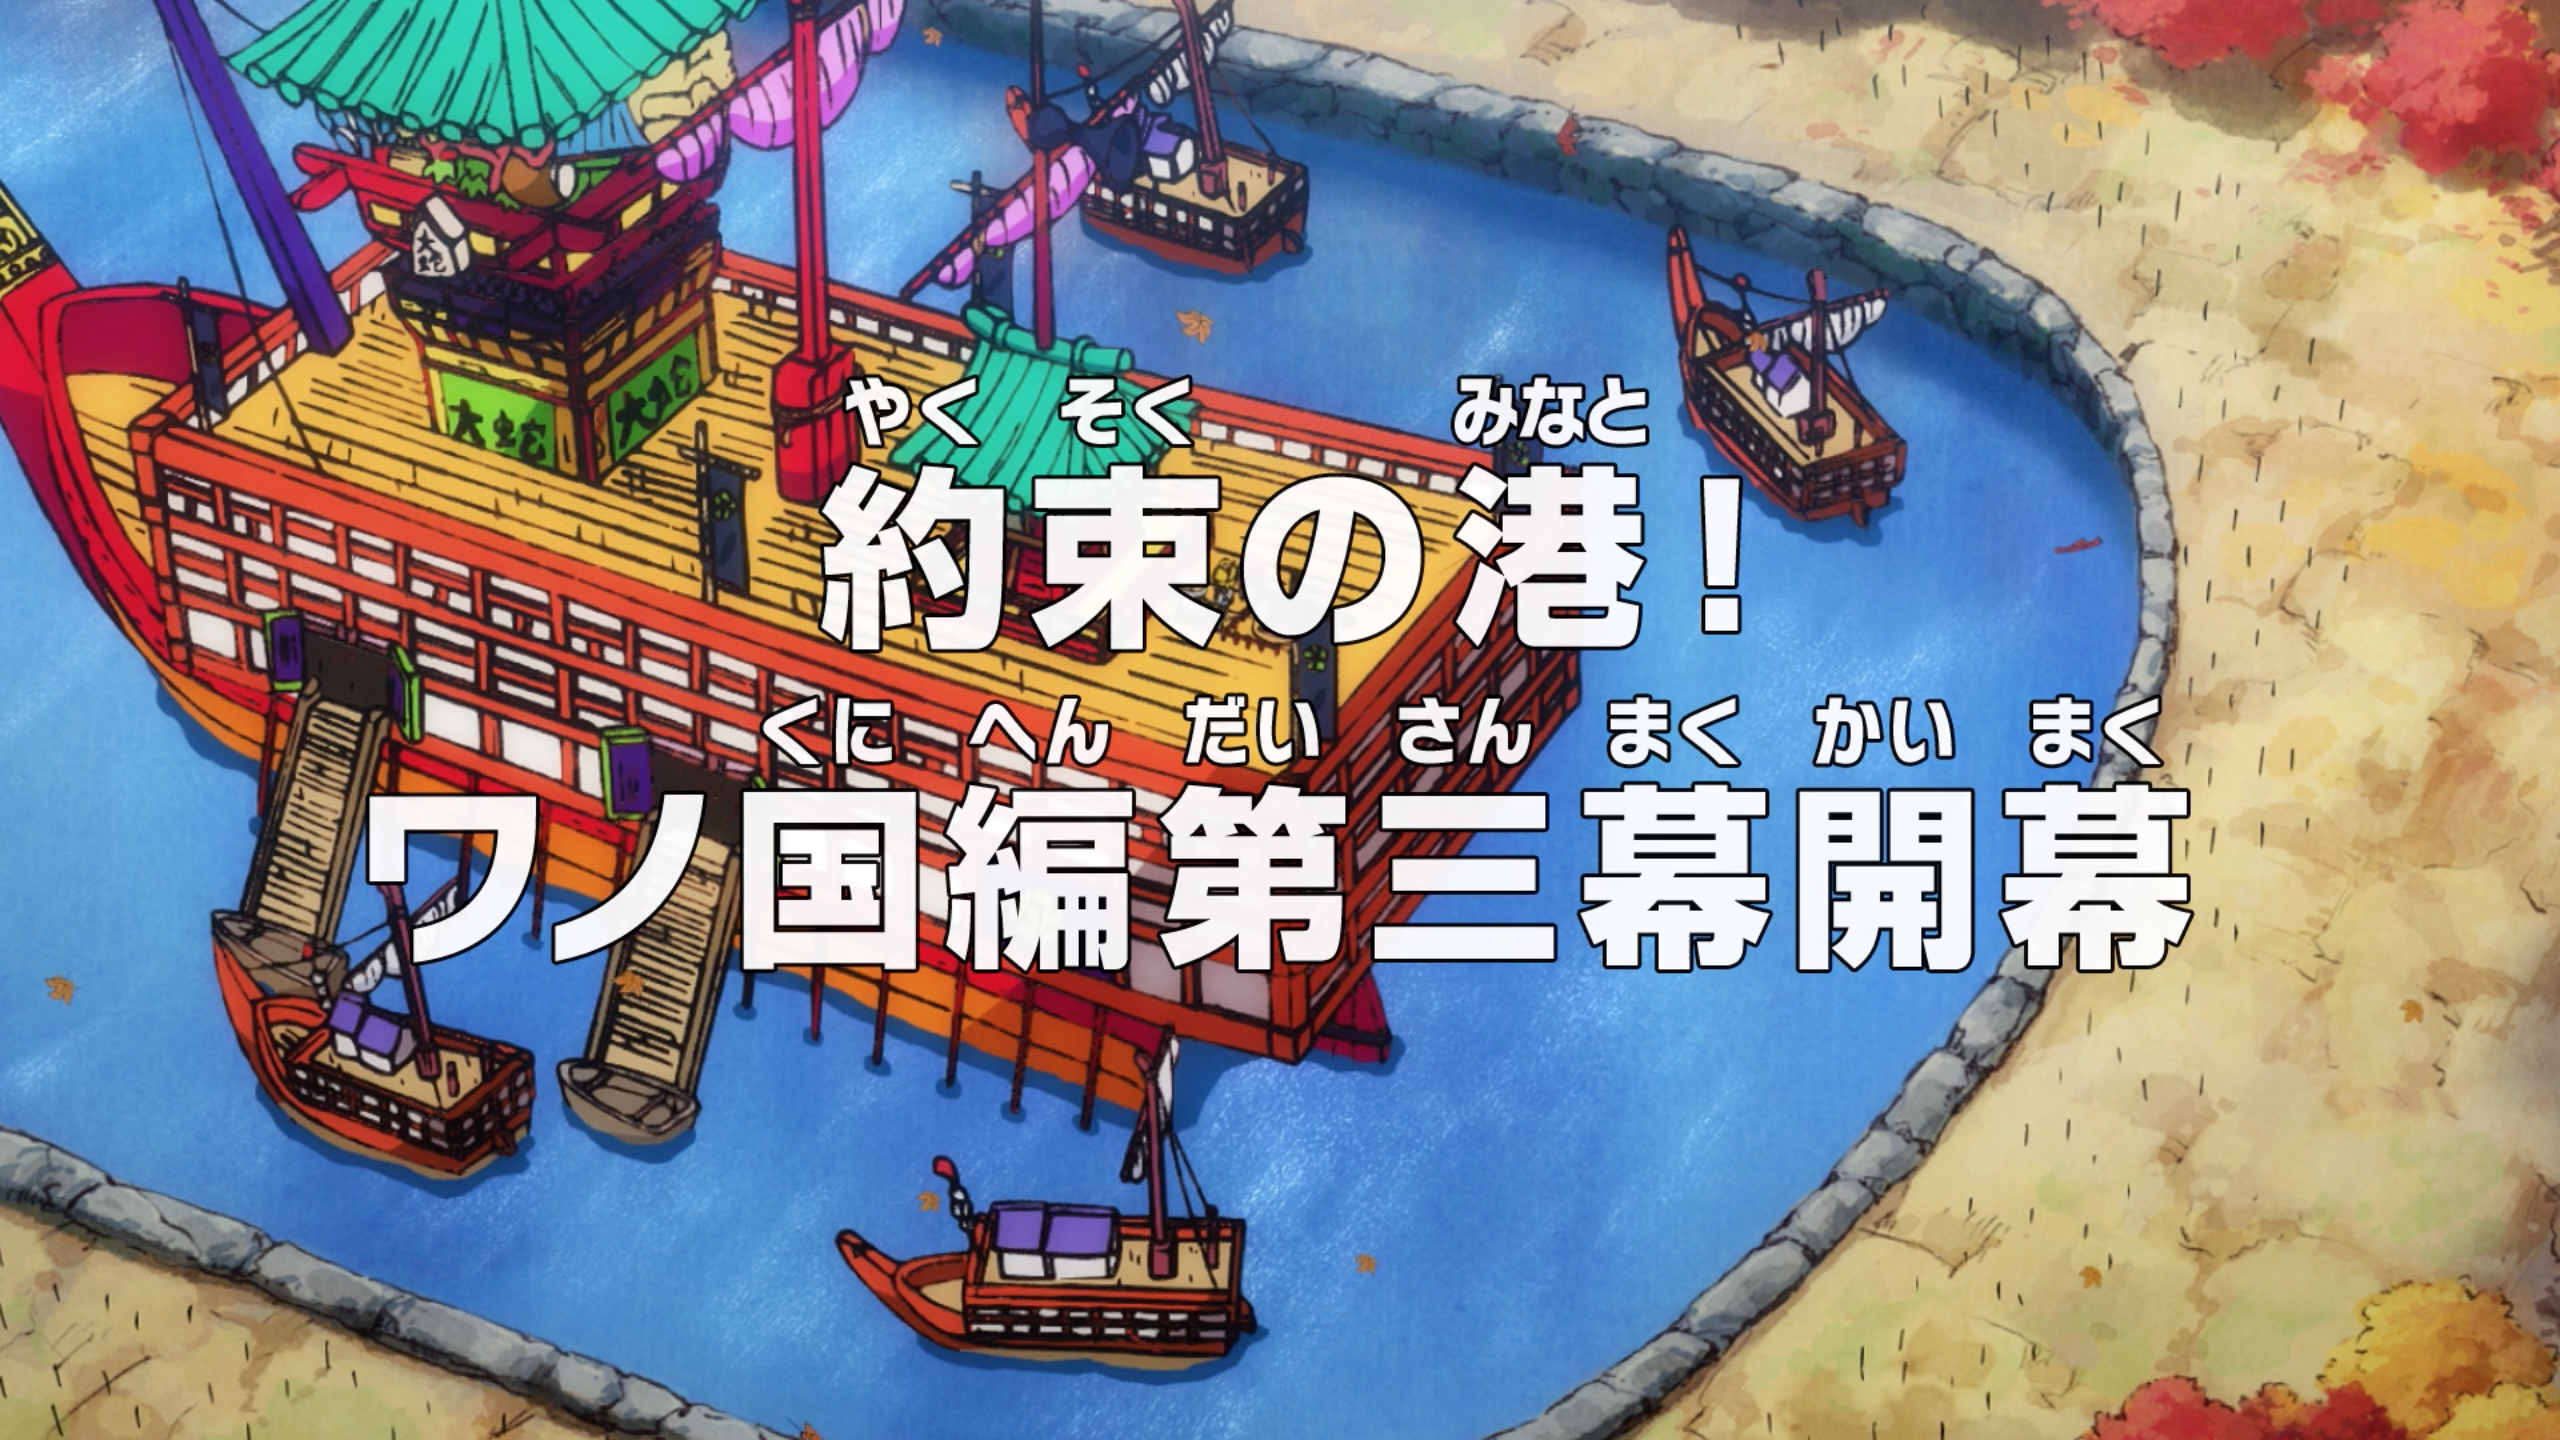 One Piece S20E1032 (The Dawn of the Land of Wano – The All-Out